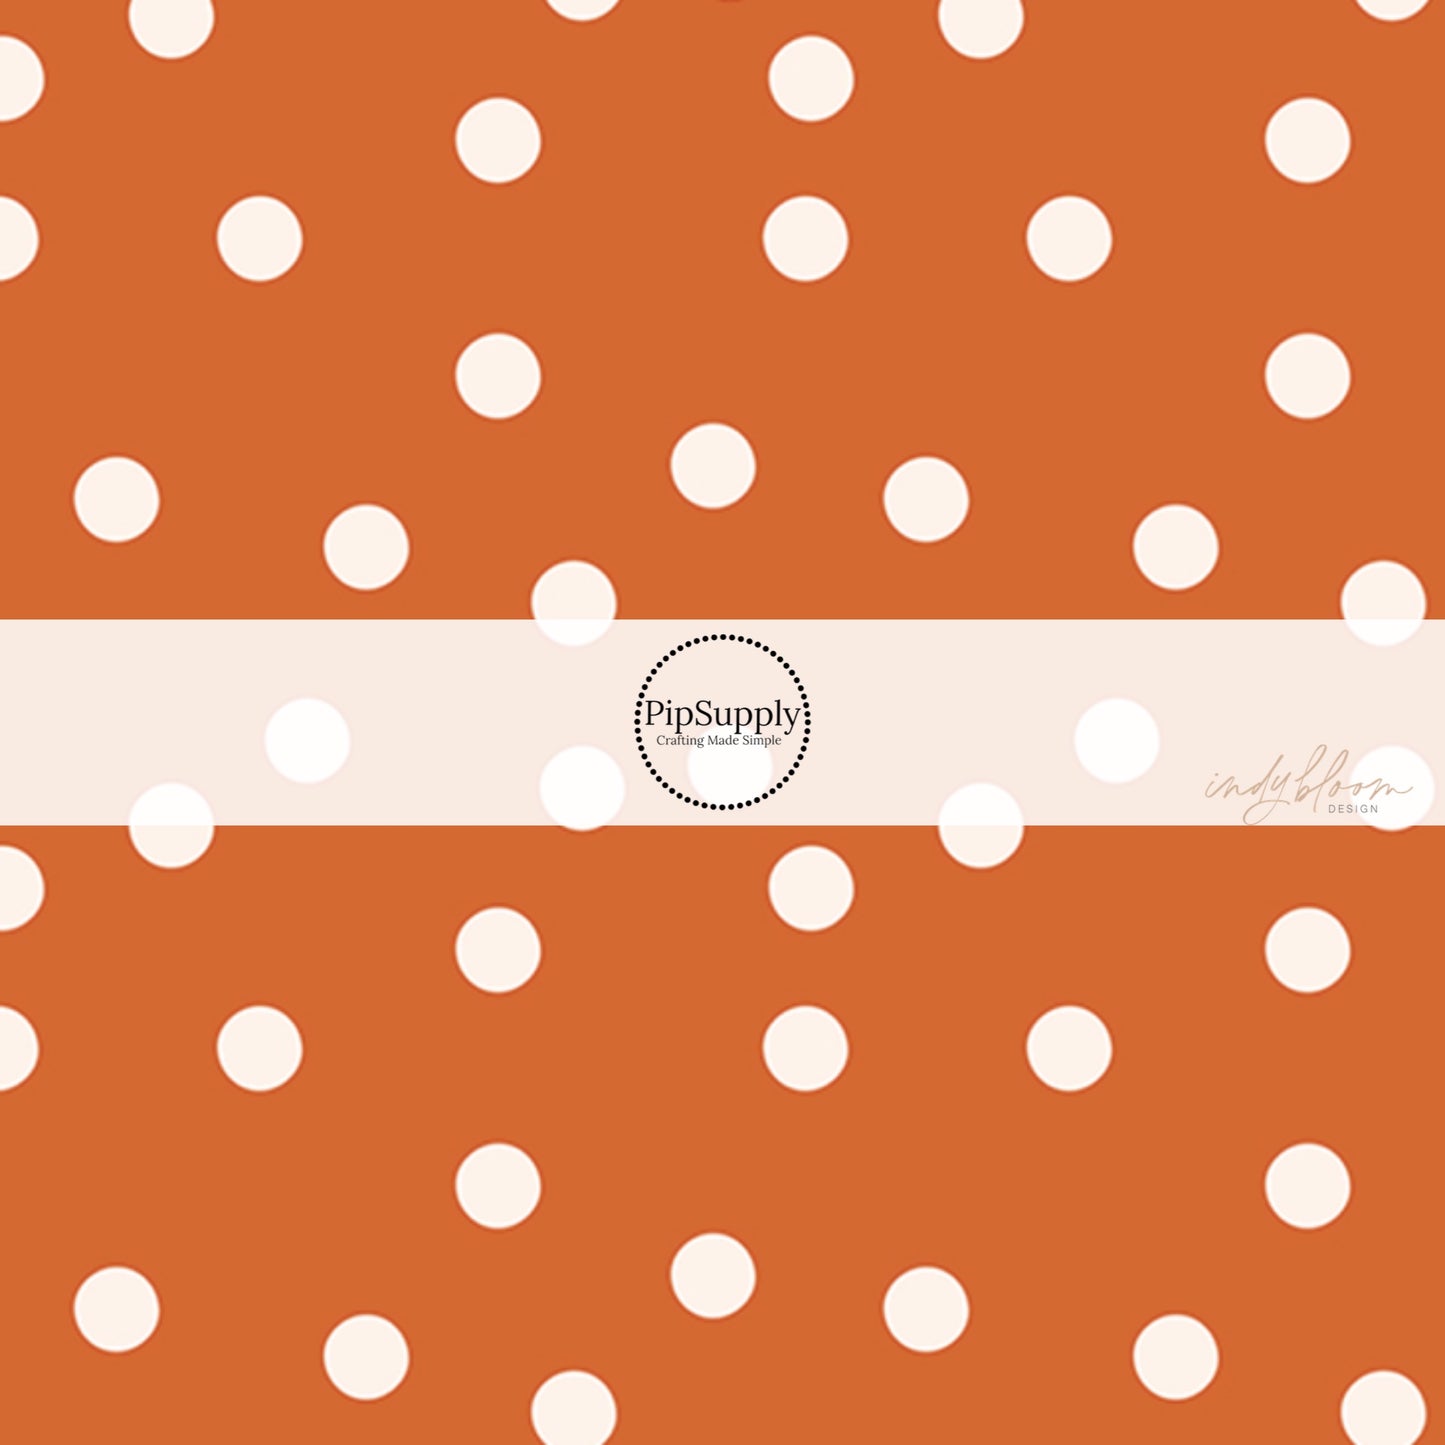 These dot themed fabric by the yard features small white dots on orange. This fun dotted themed fabric can be used for all your sewing and crafting needs! 